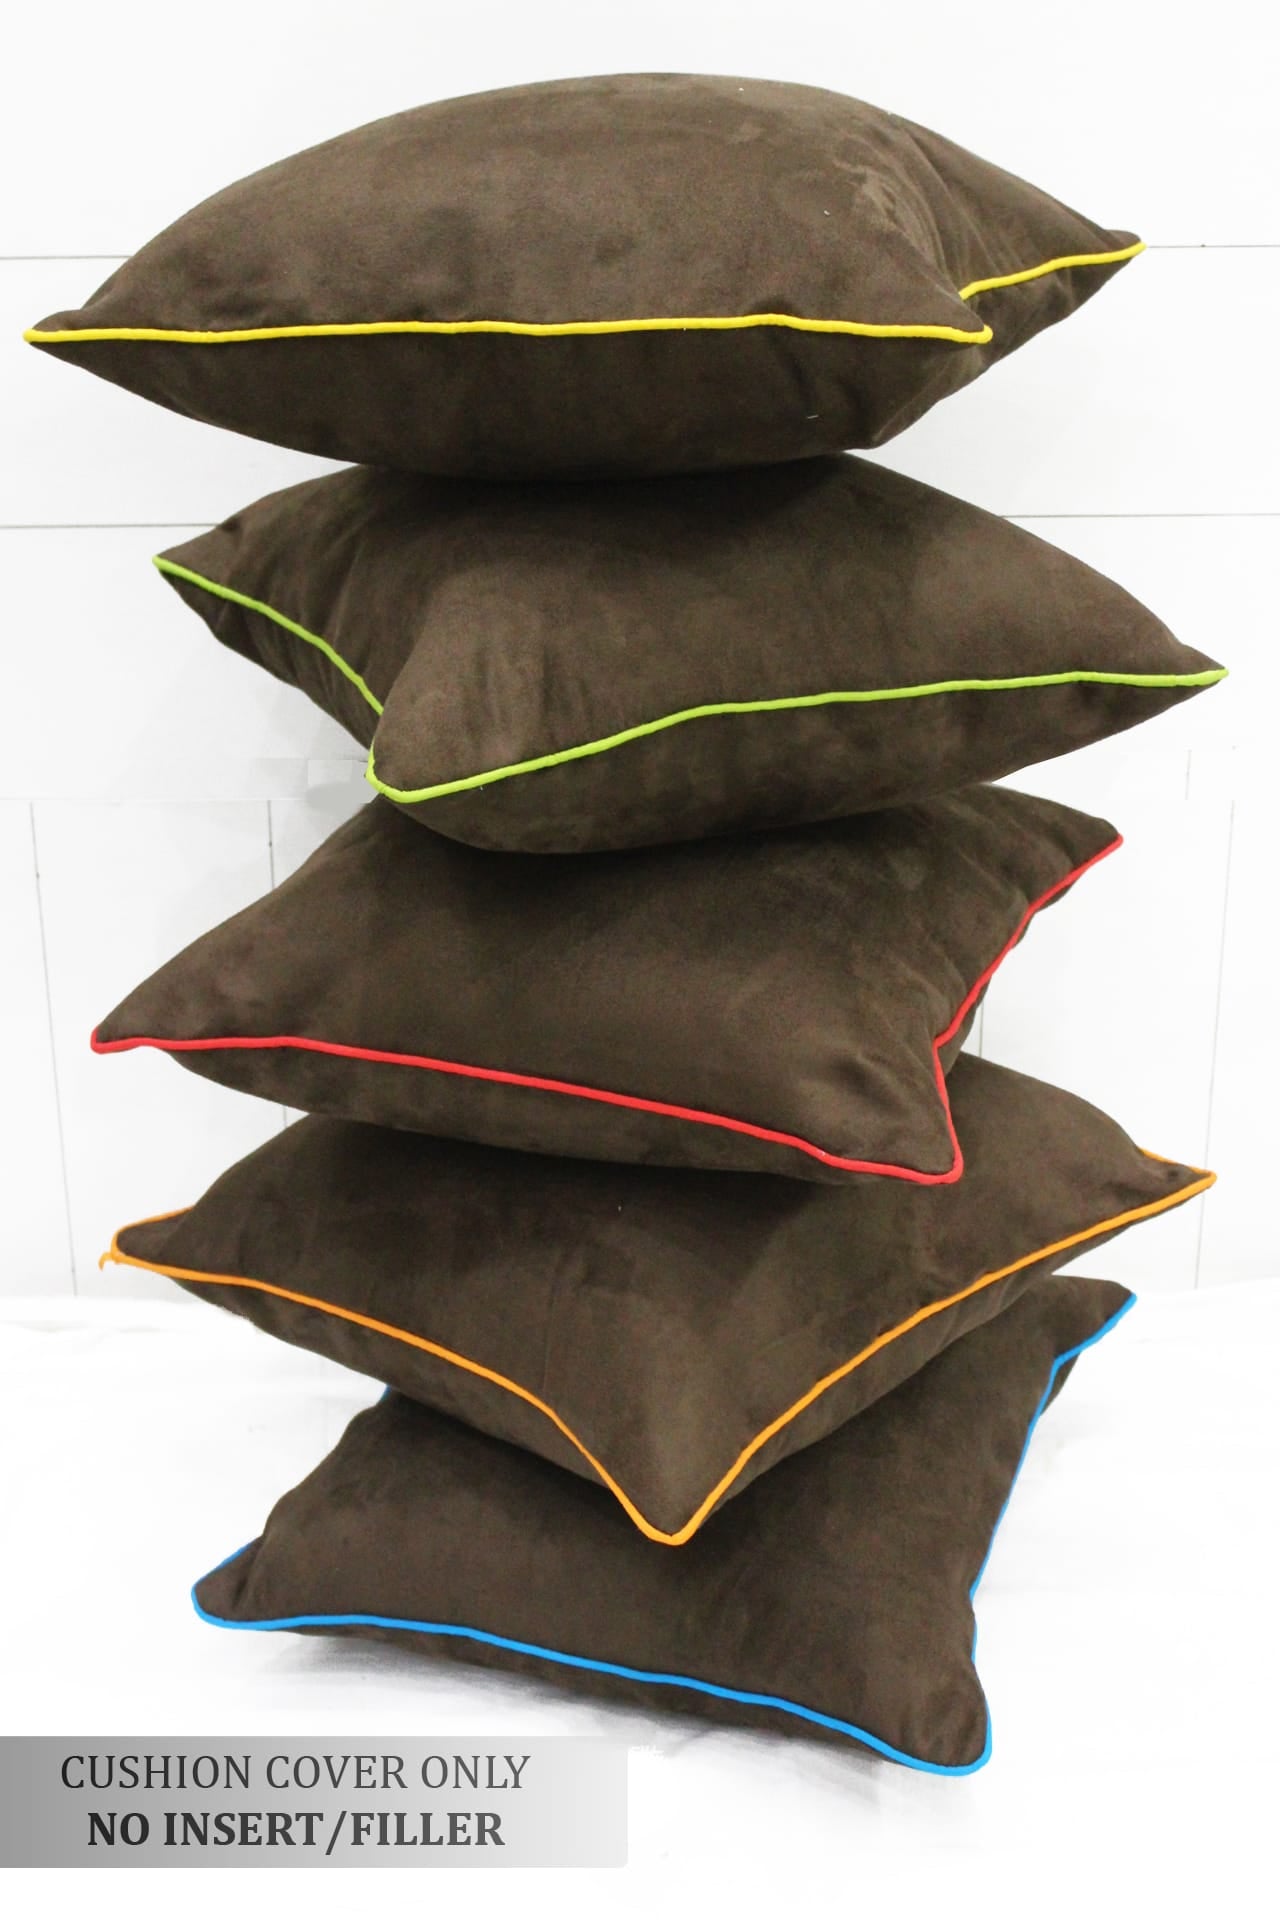 Soft Suede Velvet Cushion Cover Set in Brown online in India(5 Pcs)